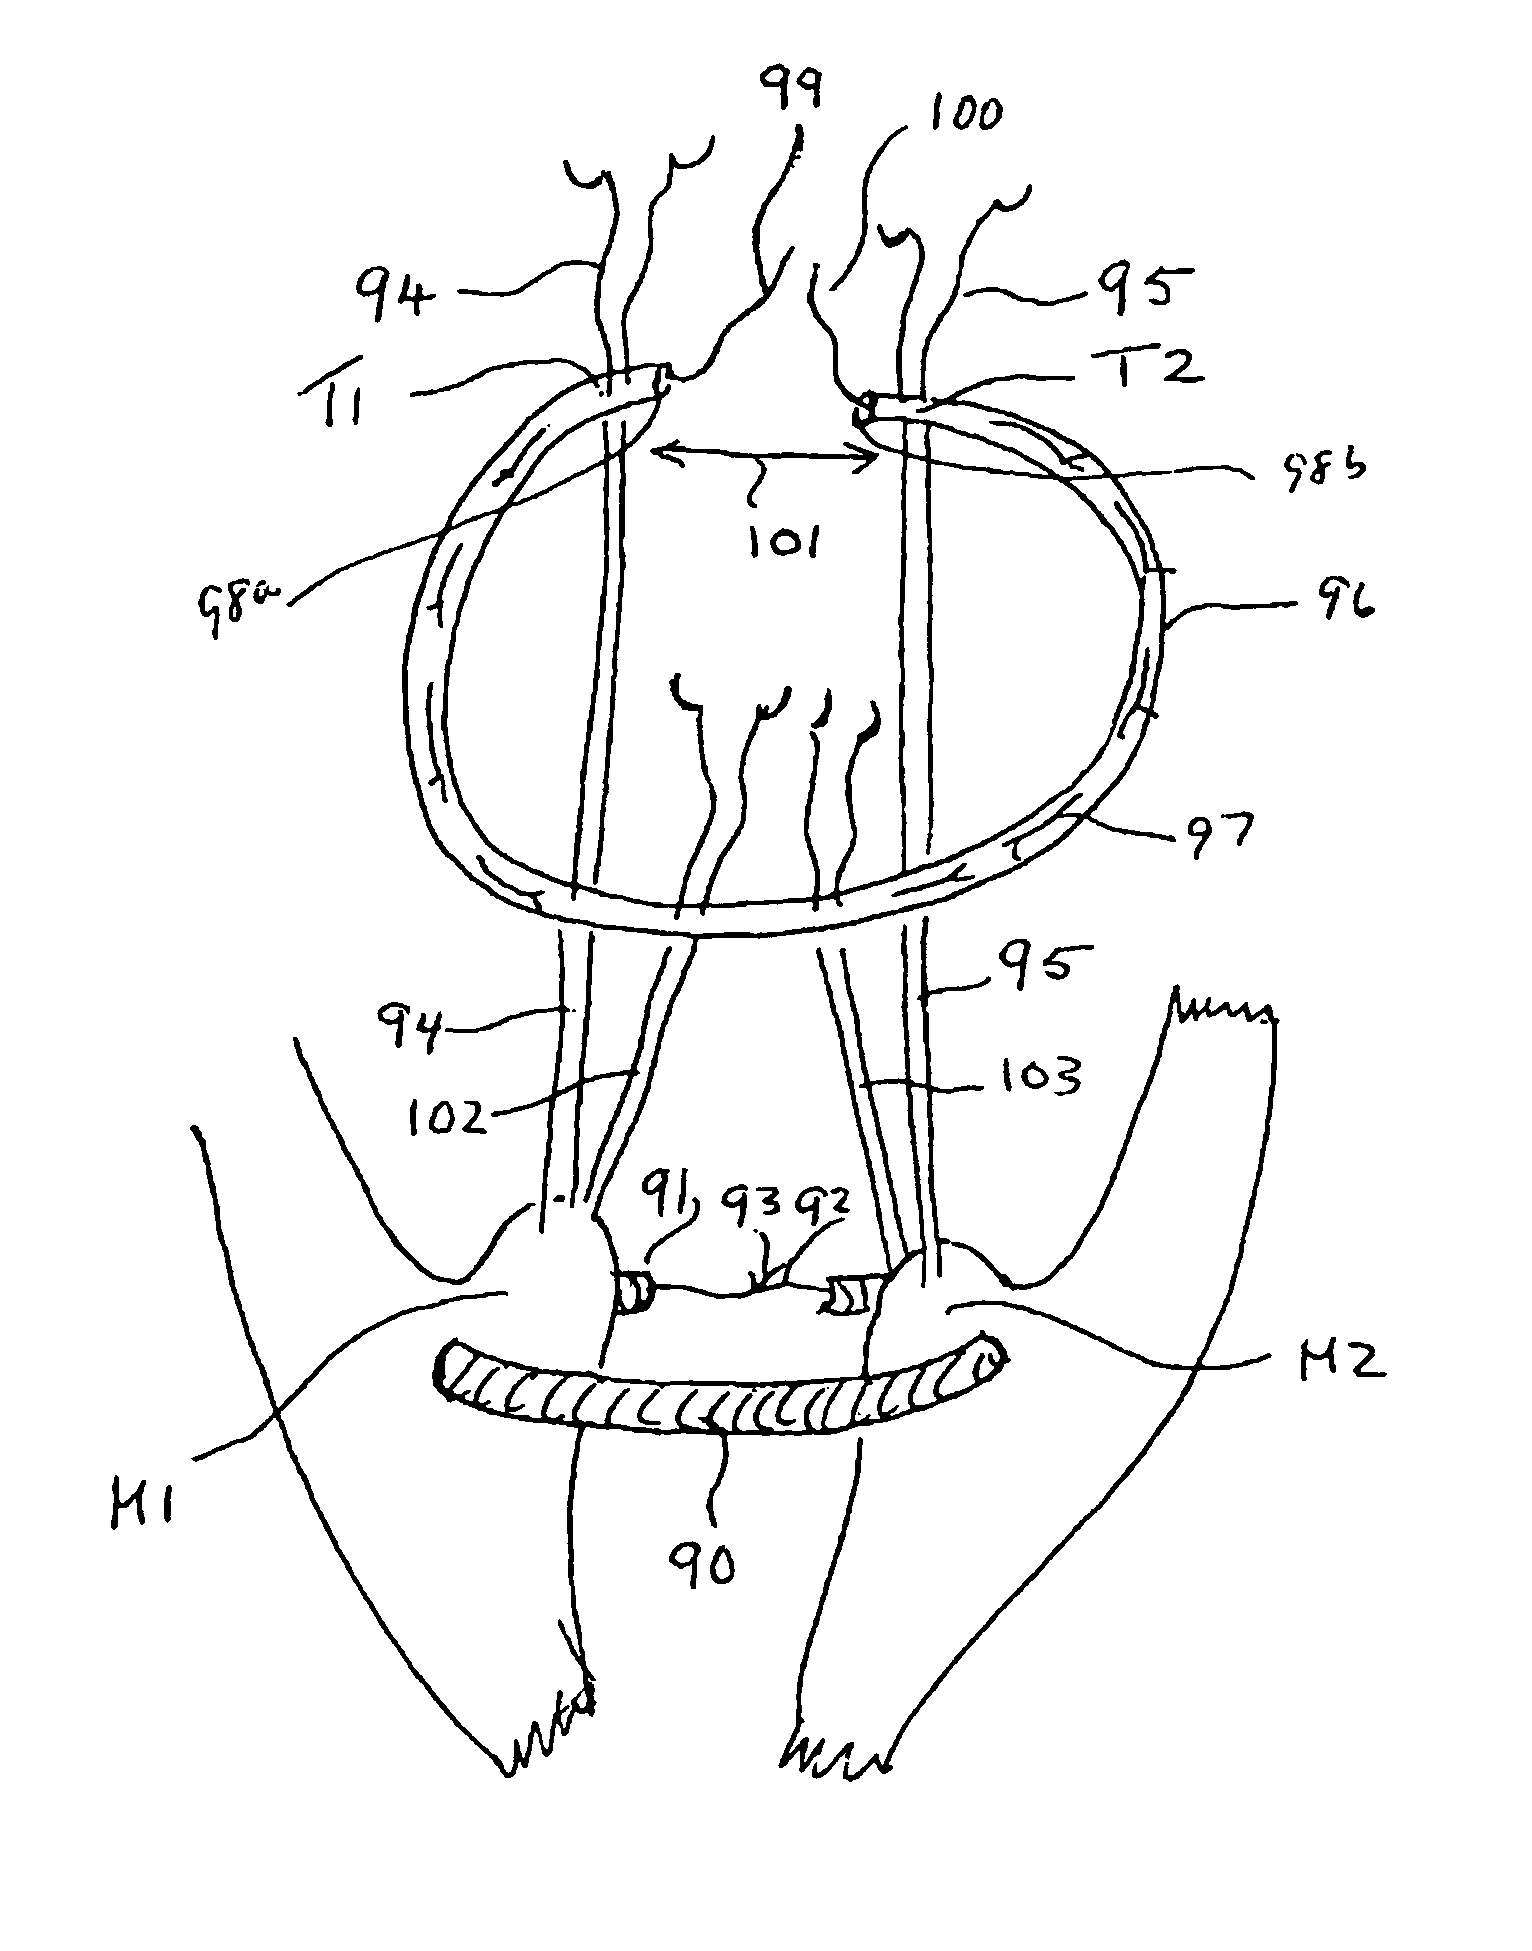 Internal prosthesis for reconstruction of cardiac geometry